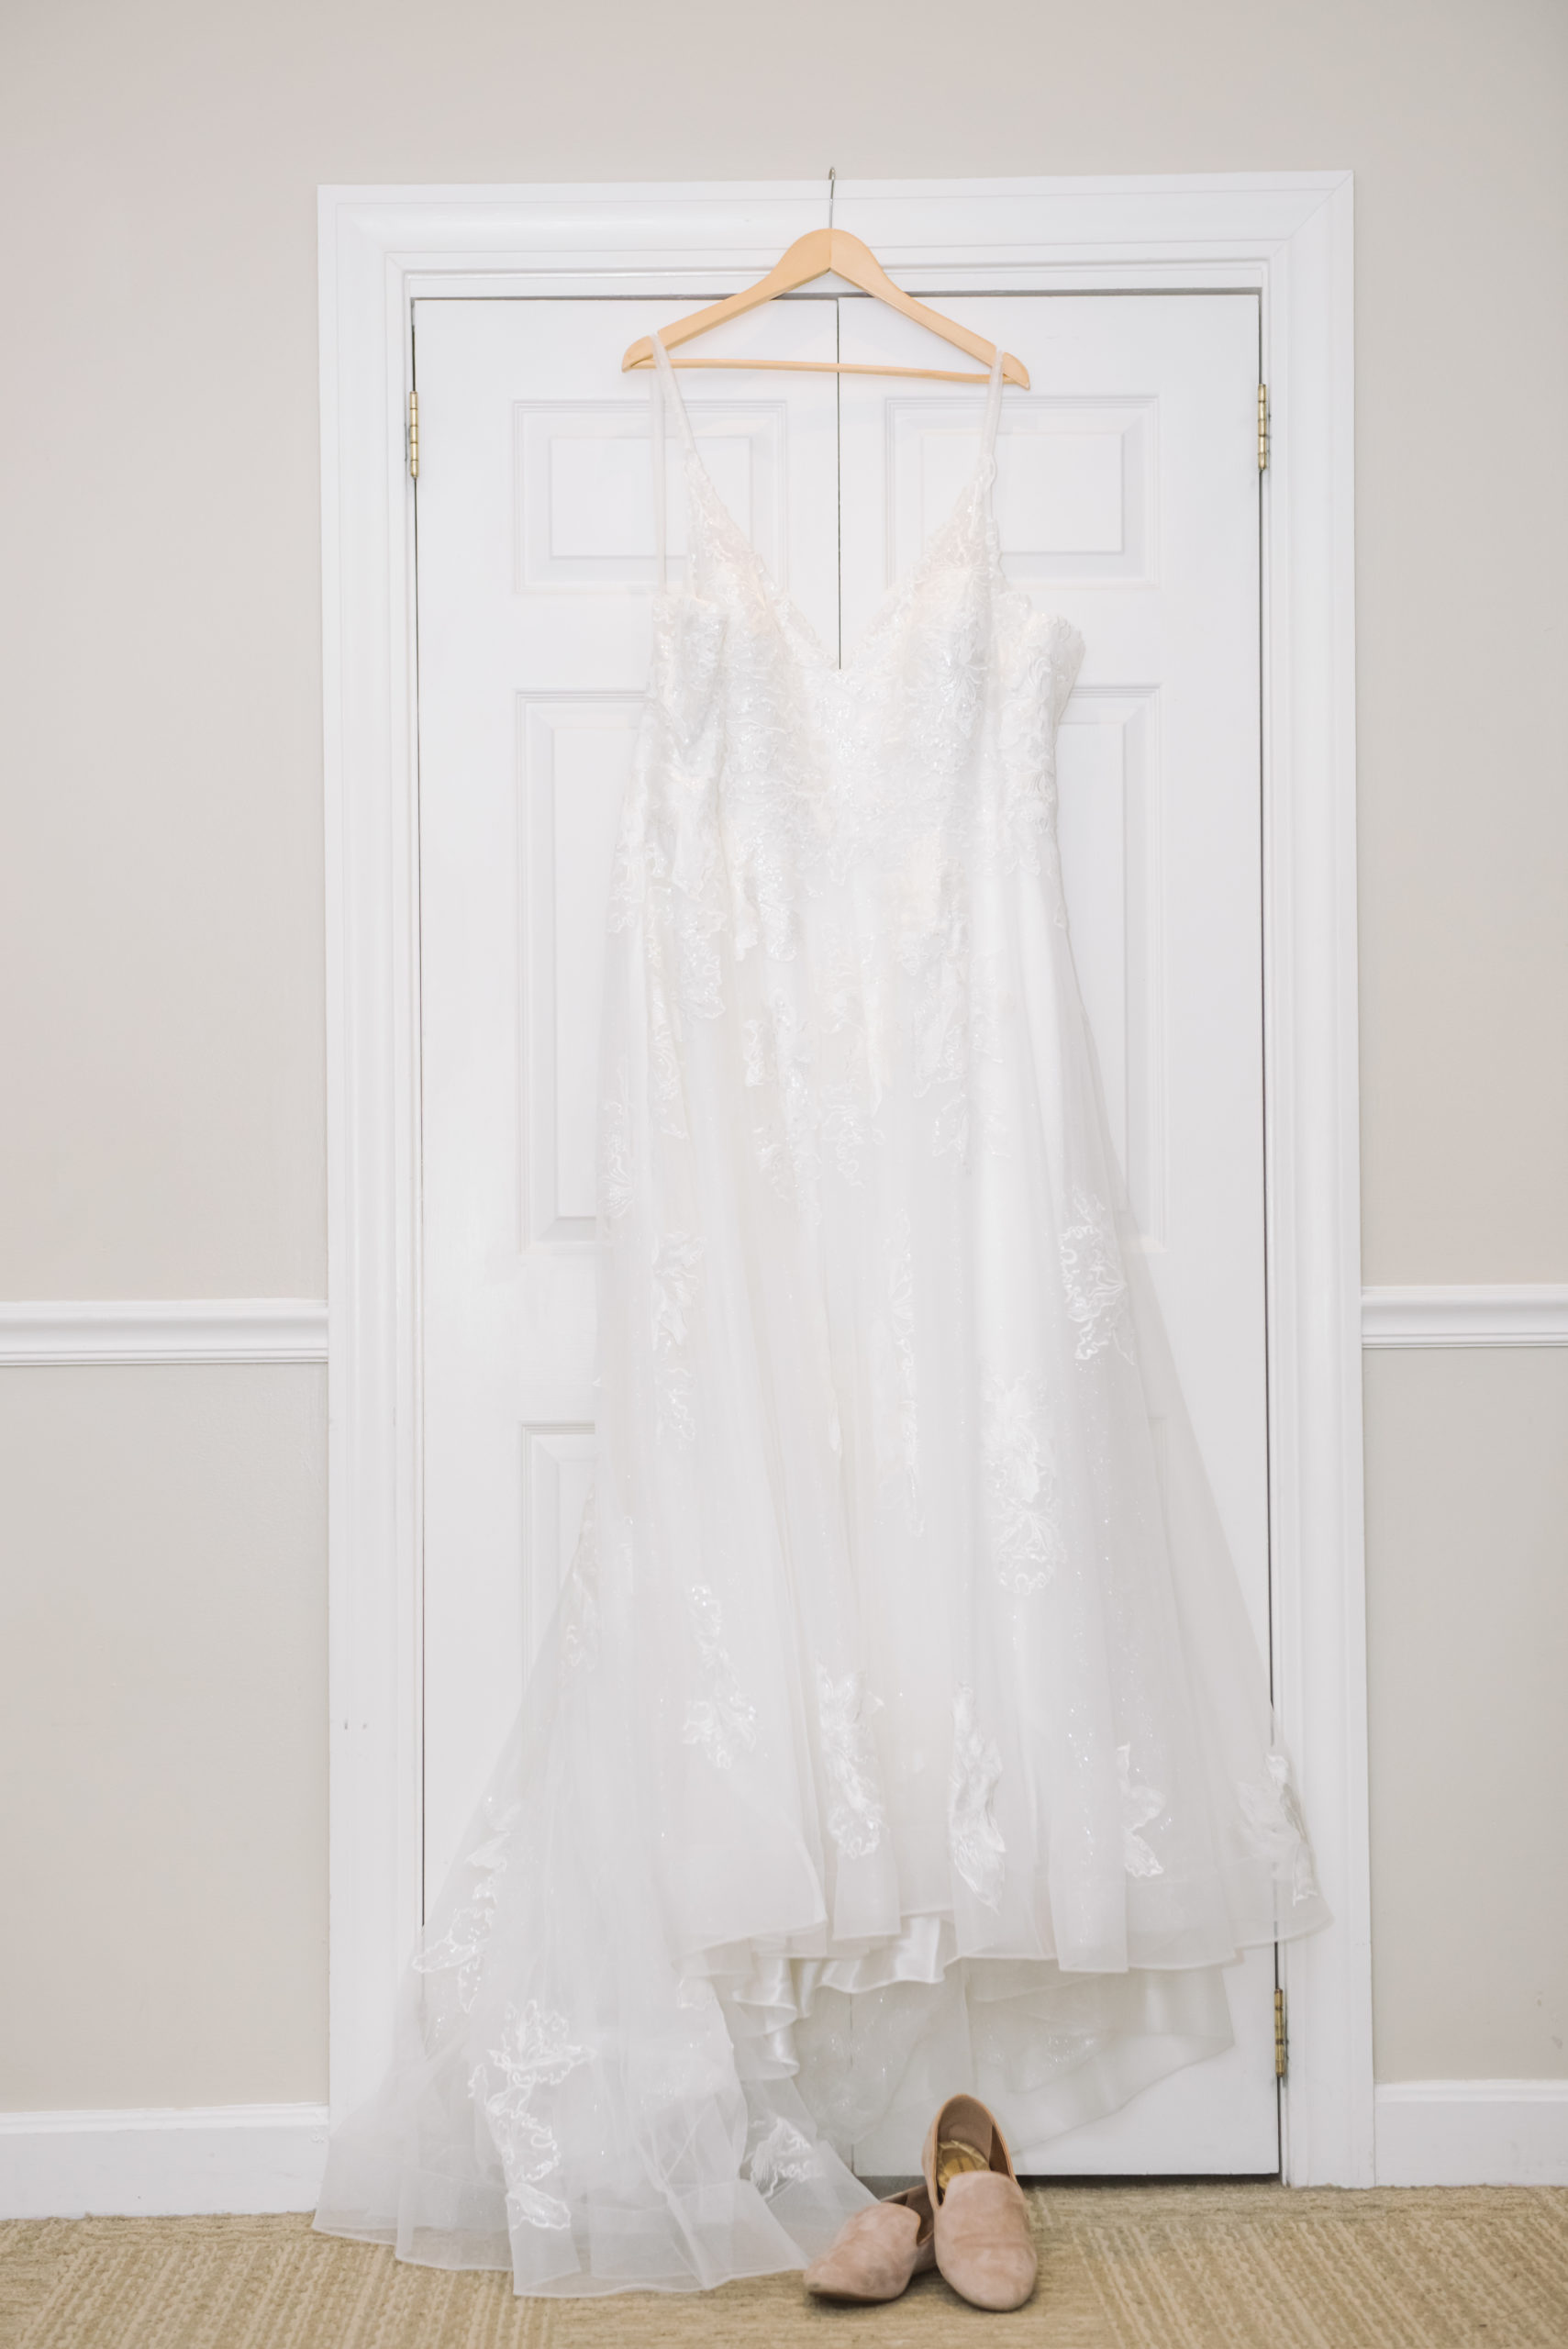 Bride's ceremony gown hanging on a light wooden hanger on a white closet door. Her ceremony shoes are set below the dress. They are a muted pink/beige velvet.